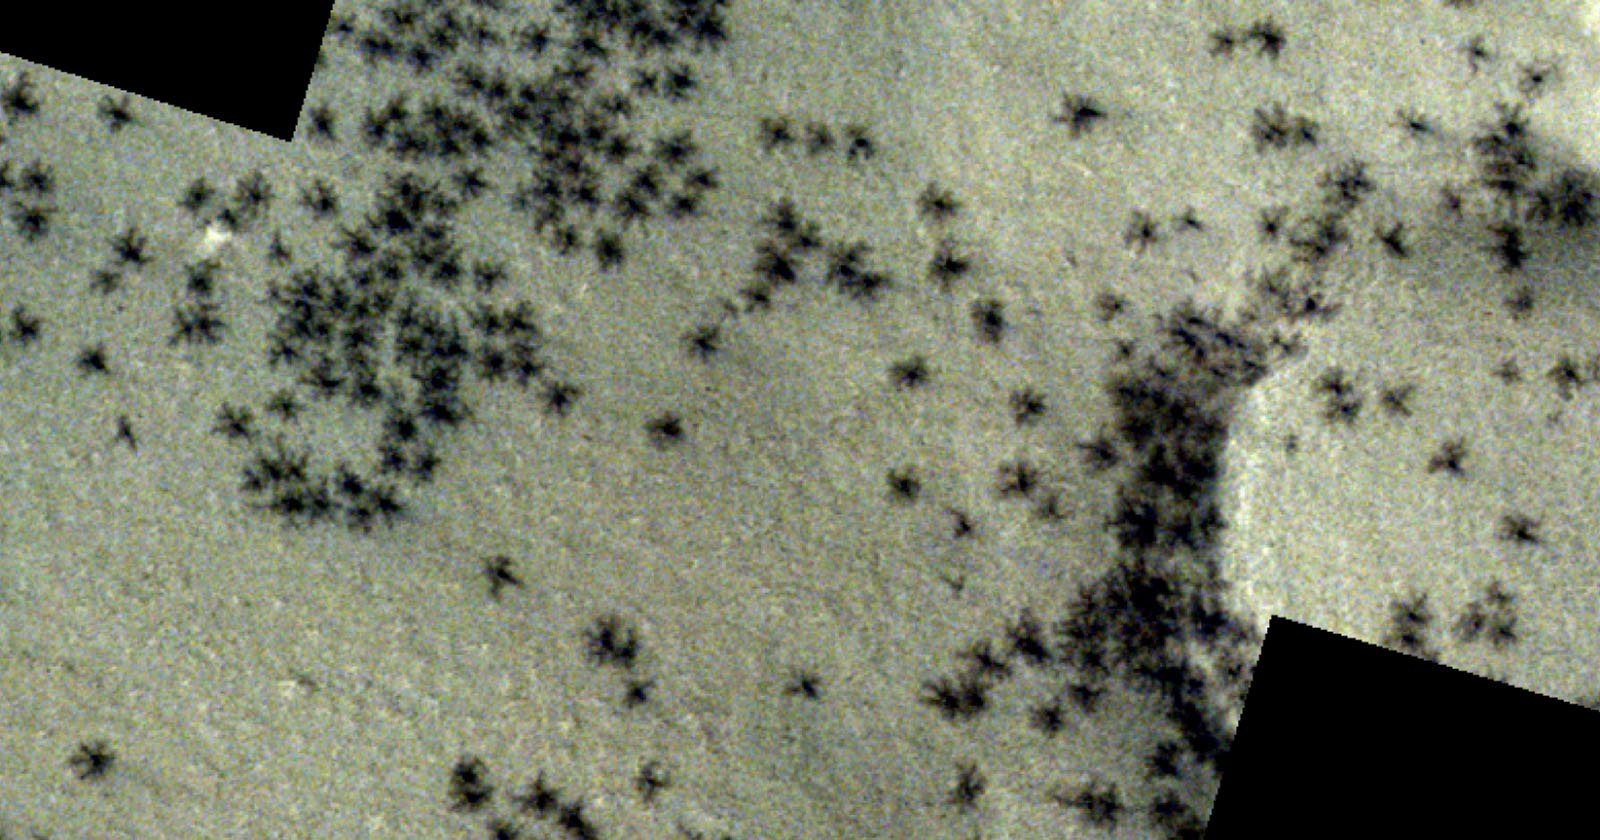 Satellite Photo Shows an Army of Black Spiders on Mars